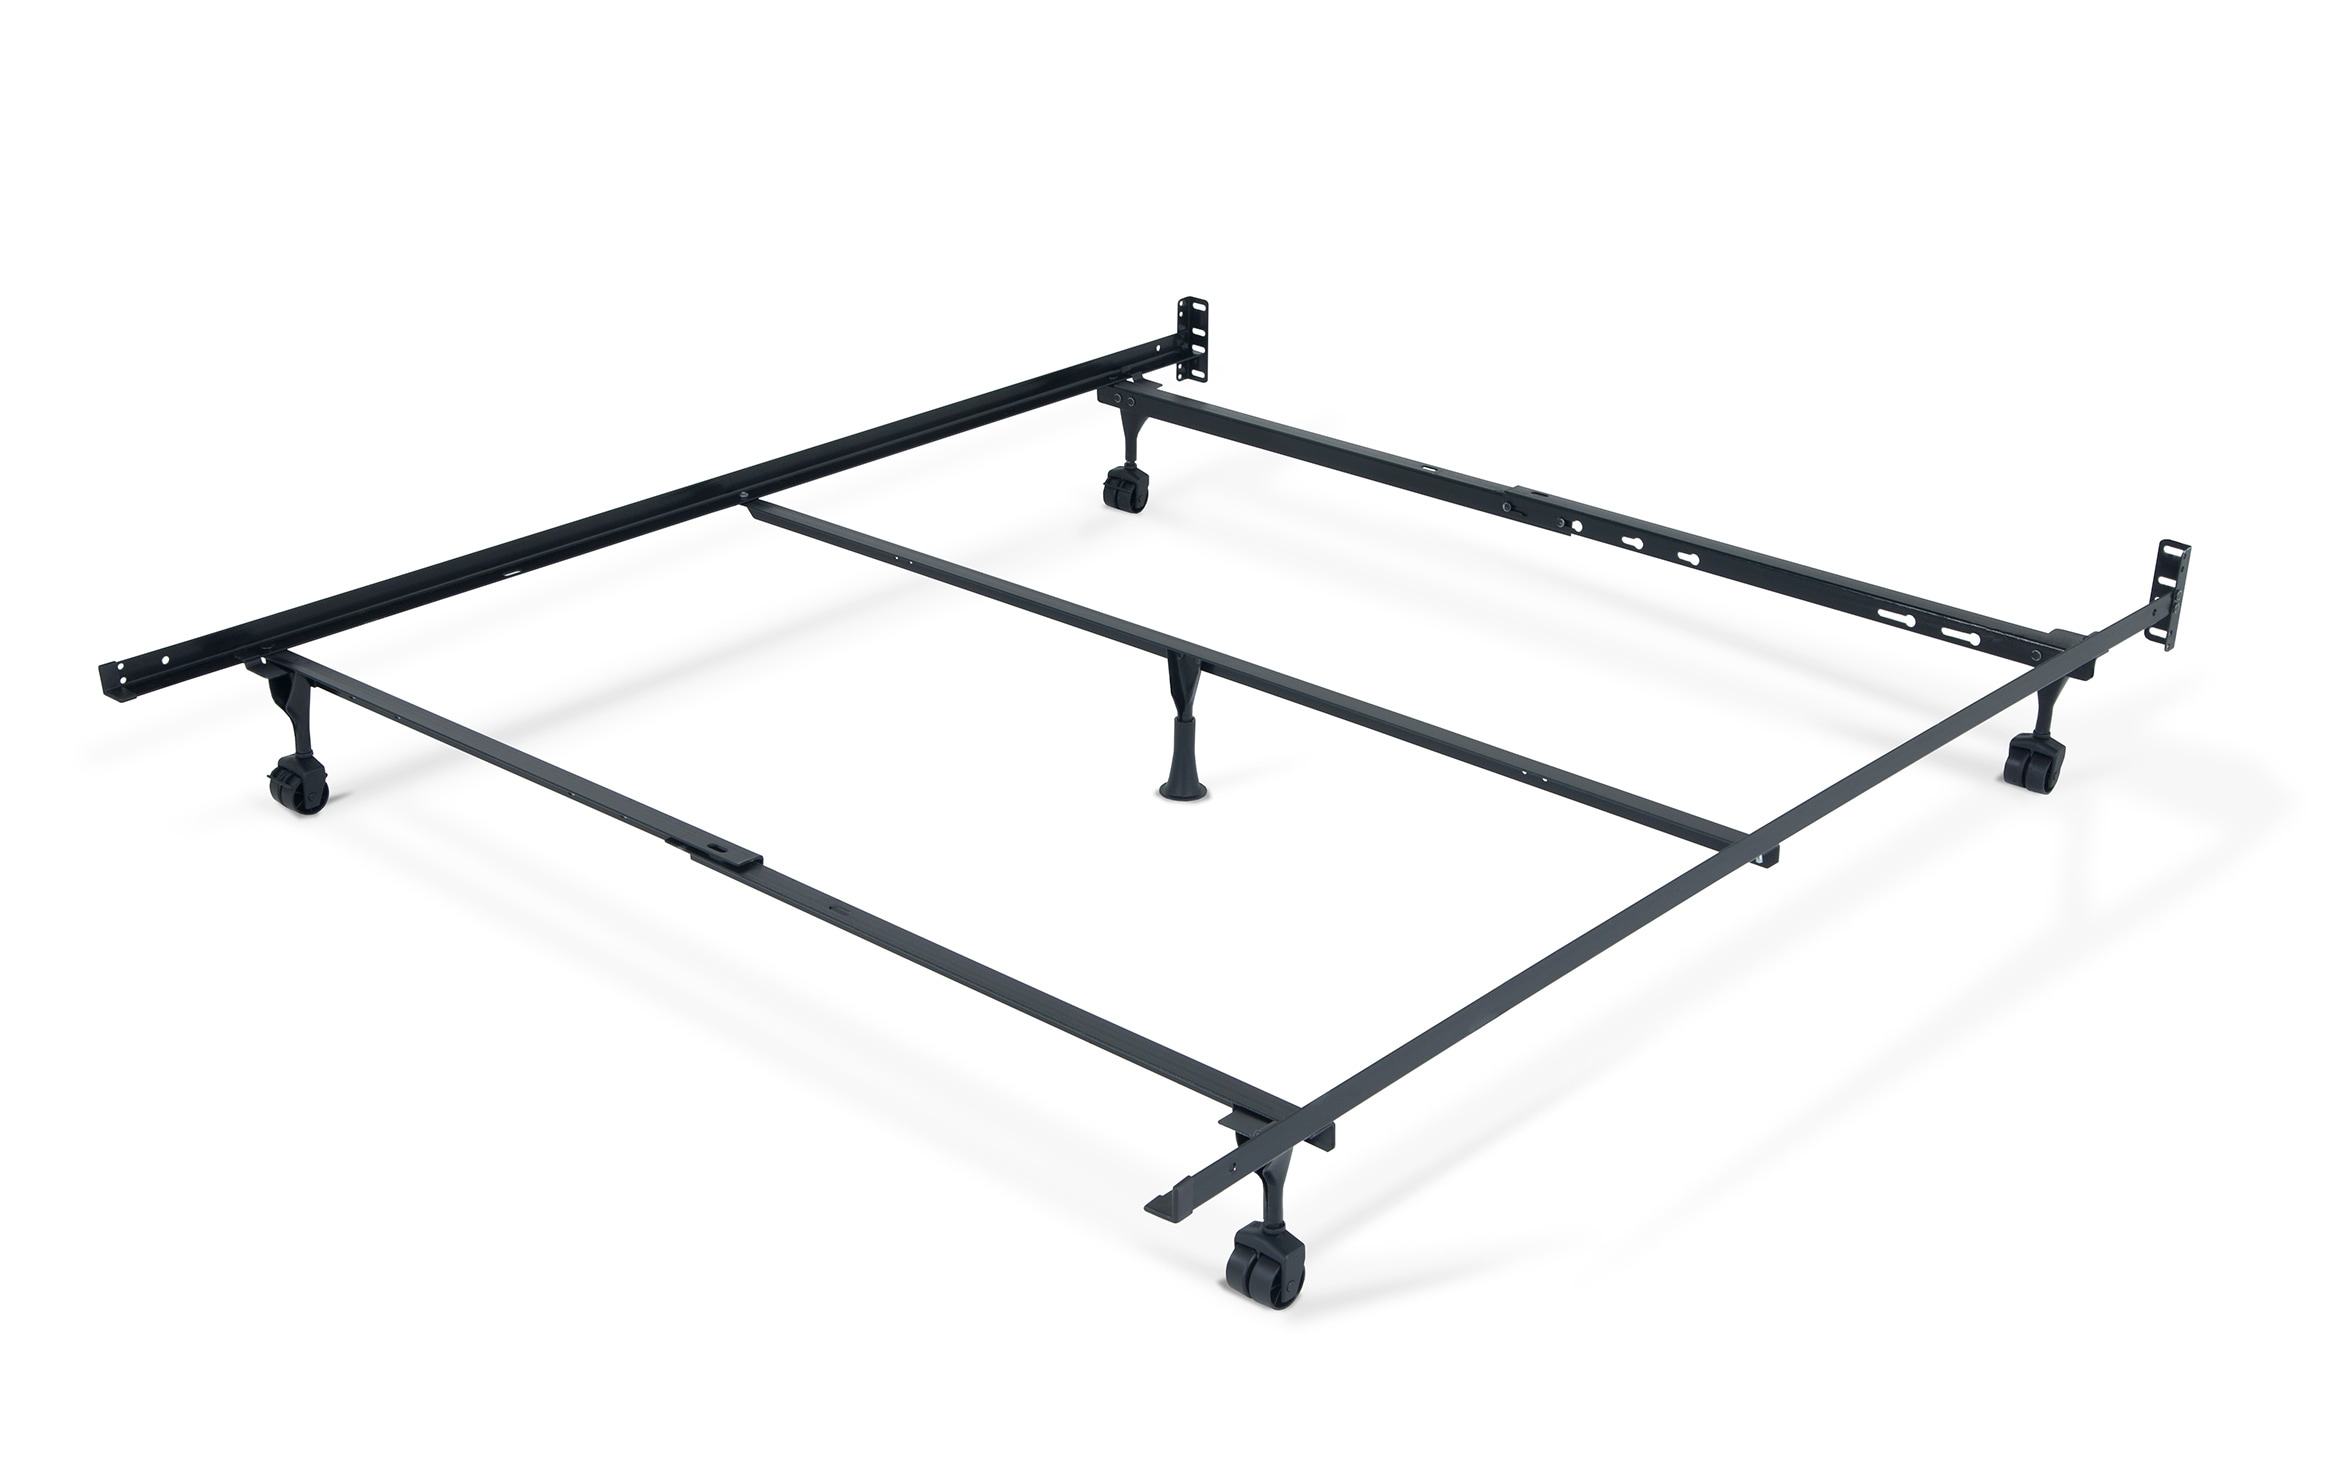 Queen King California Bed Frame, What Is The Size Of A King Bed Frame